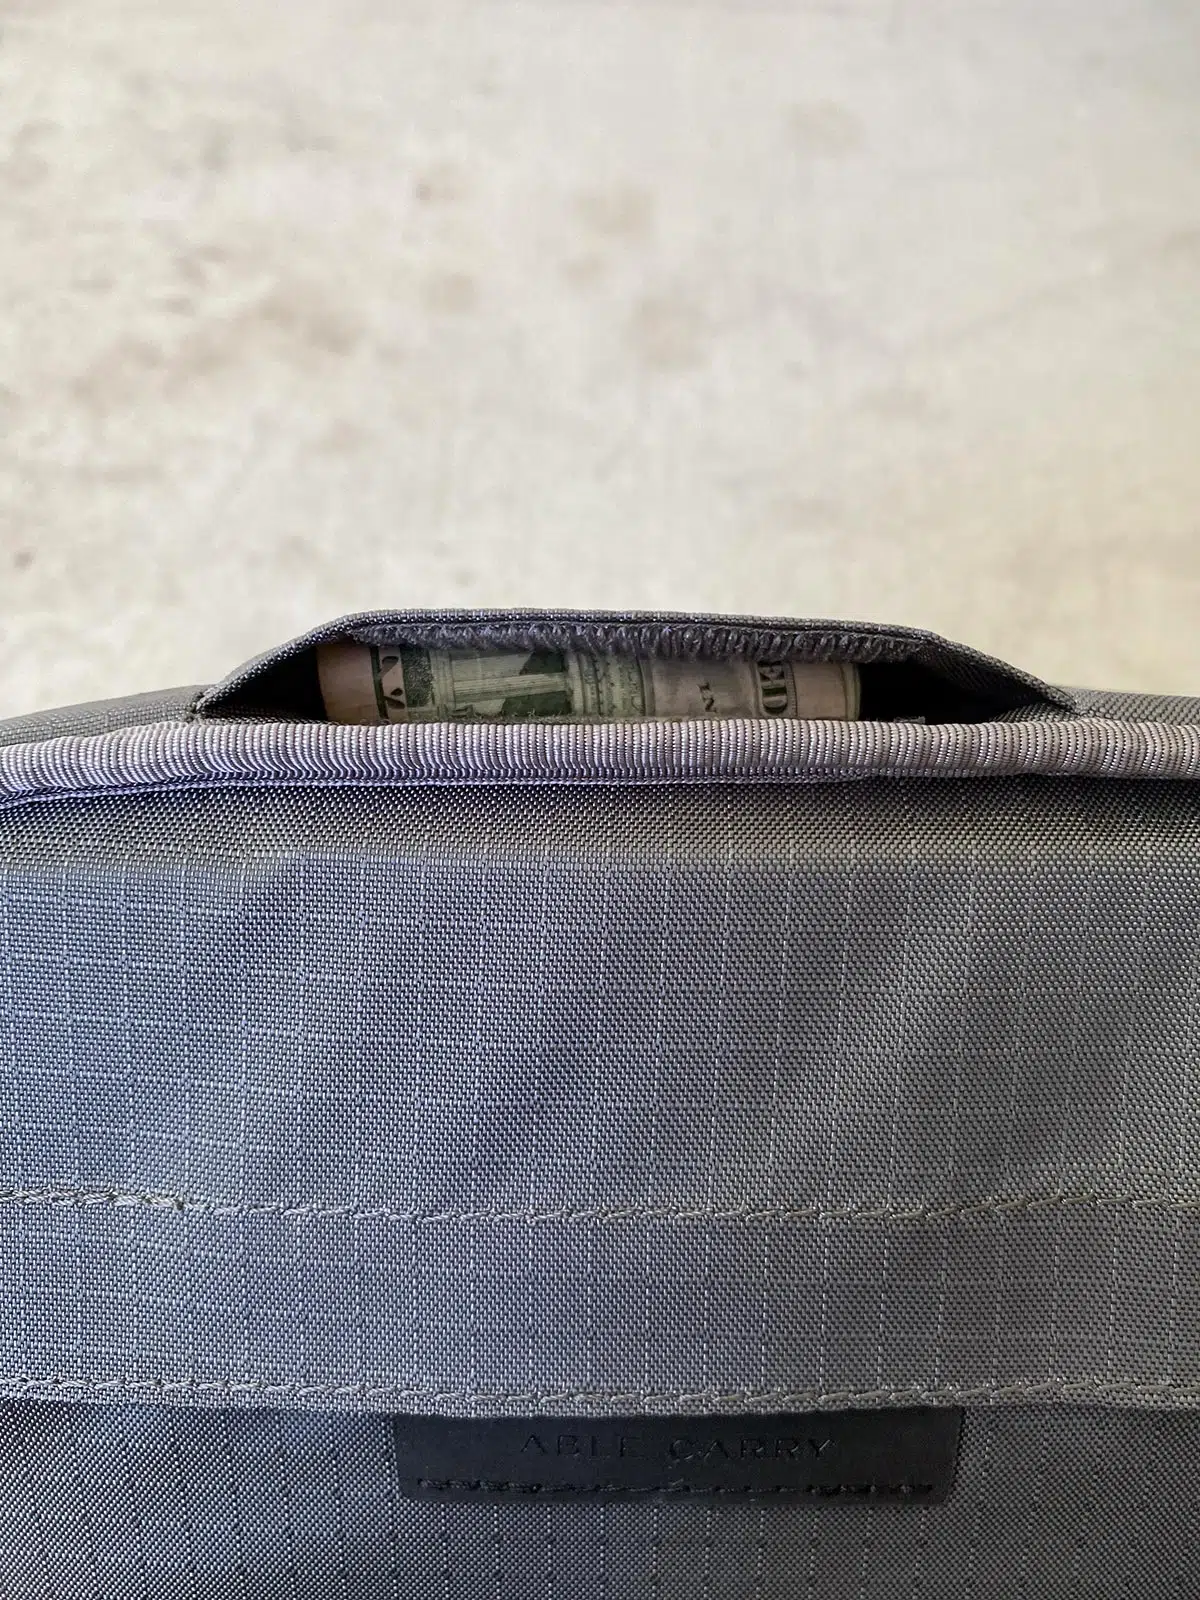 Able Carry Daily Backpack secret pocket with cash